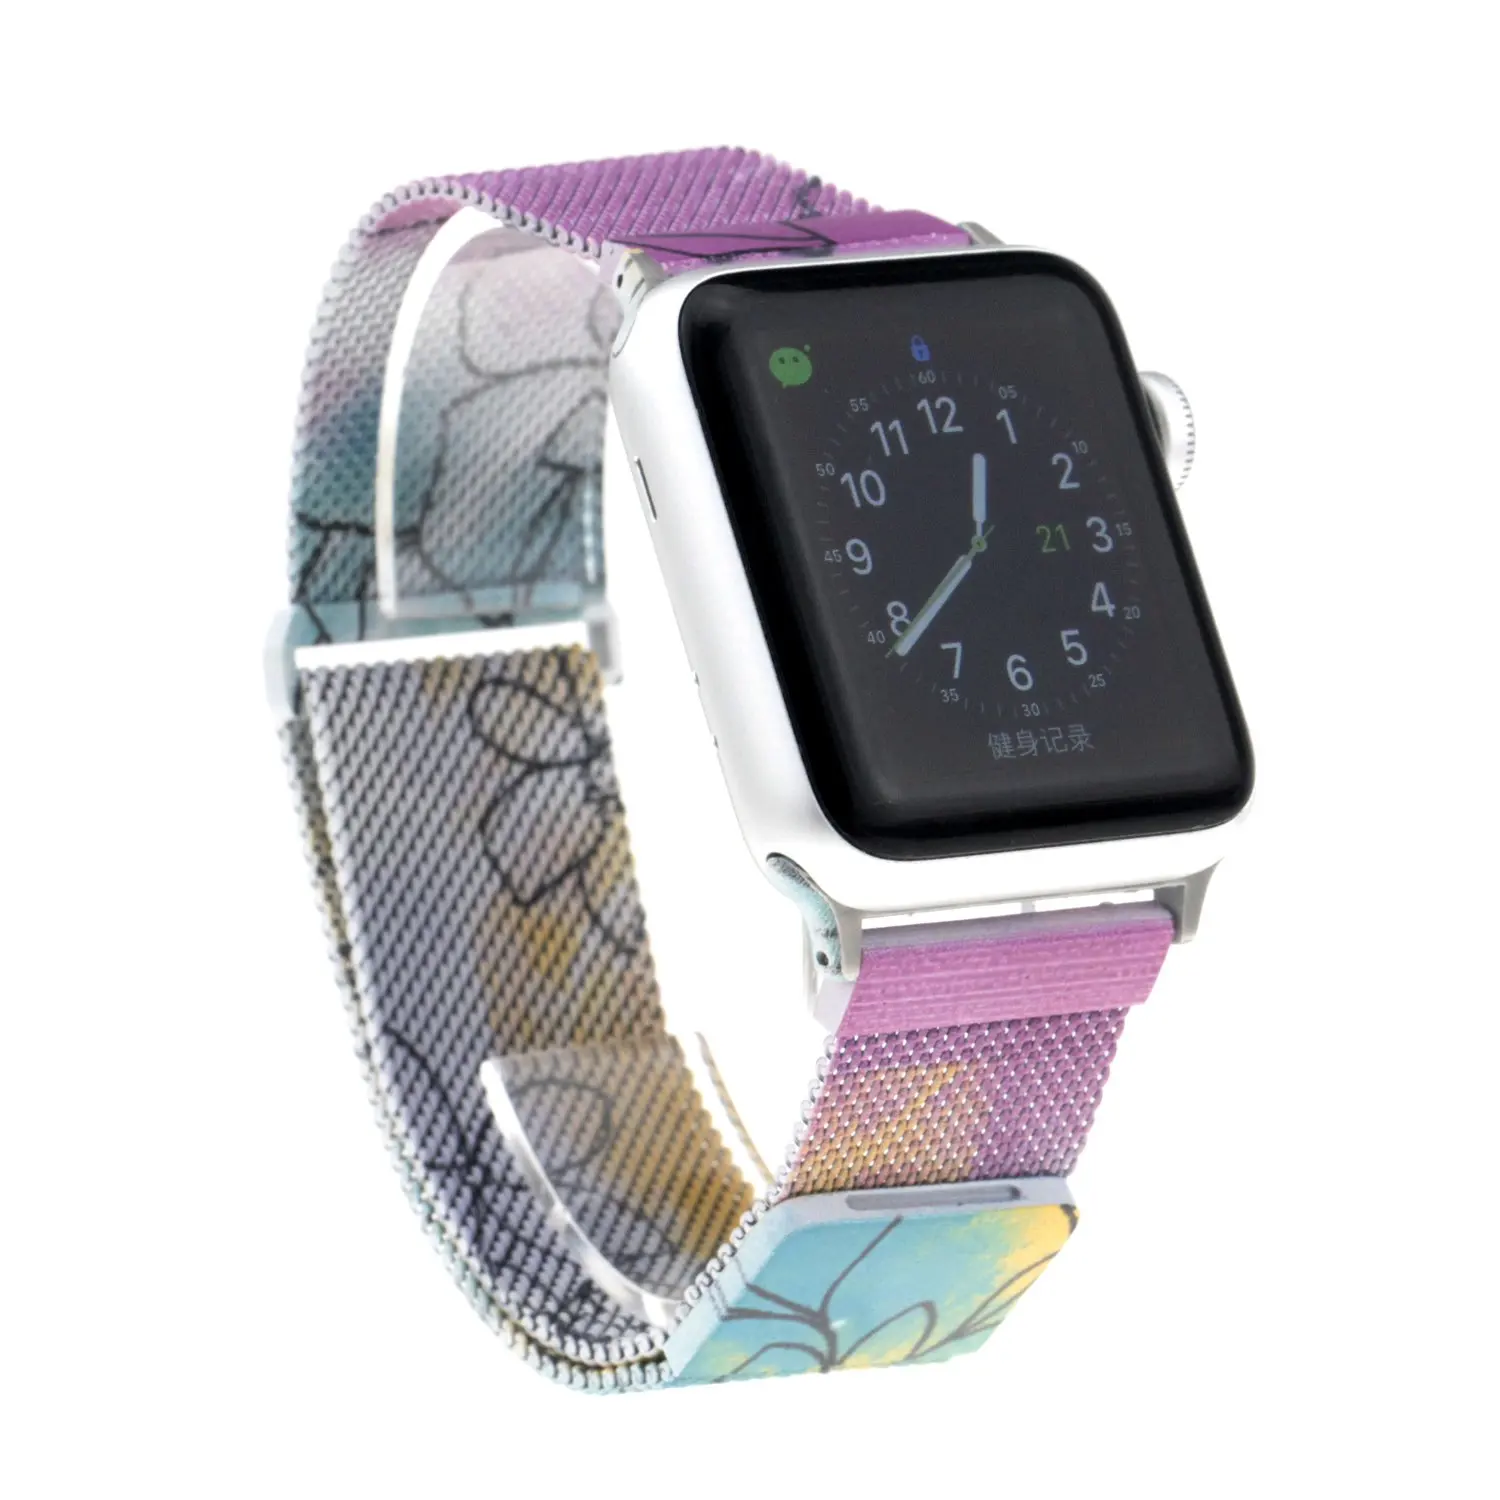 

ShanHai Milanese Loop Band for Apple Watch Band Strap 38/40mm for iWatch 5/4/3 42/44mm Stainless Steel Bracelet Wrist Watchband, Multi-color optional or customized